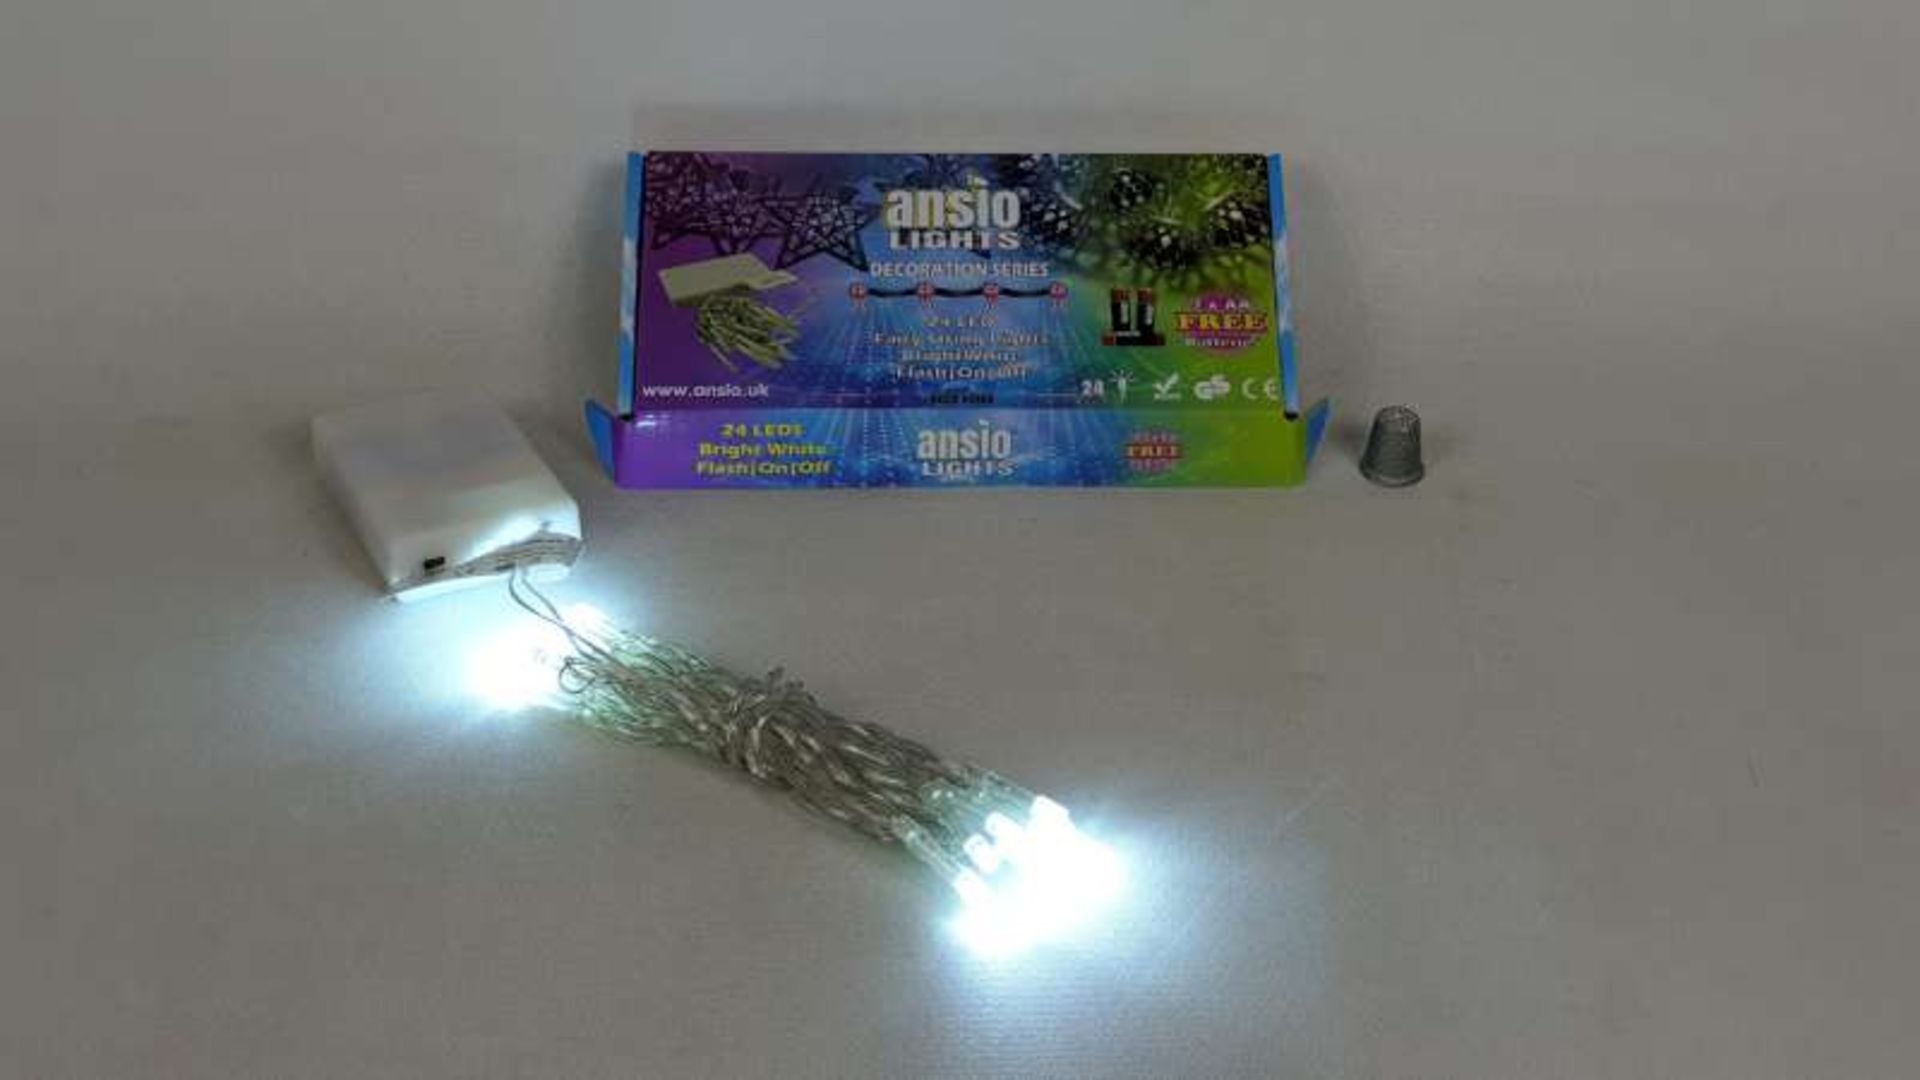 60 X BRAND NEW BOXED 24 LED COOL WHITE CHRISTMAS BATTERY OPERATED STRING FAIRY CHRISTMAS LIGHTS WITH